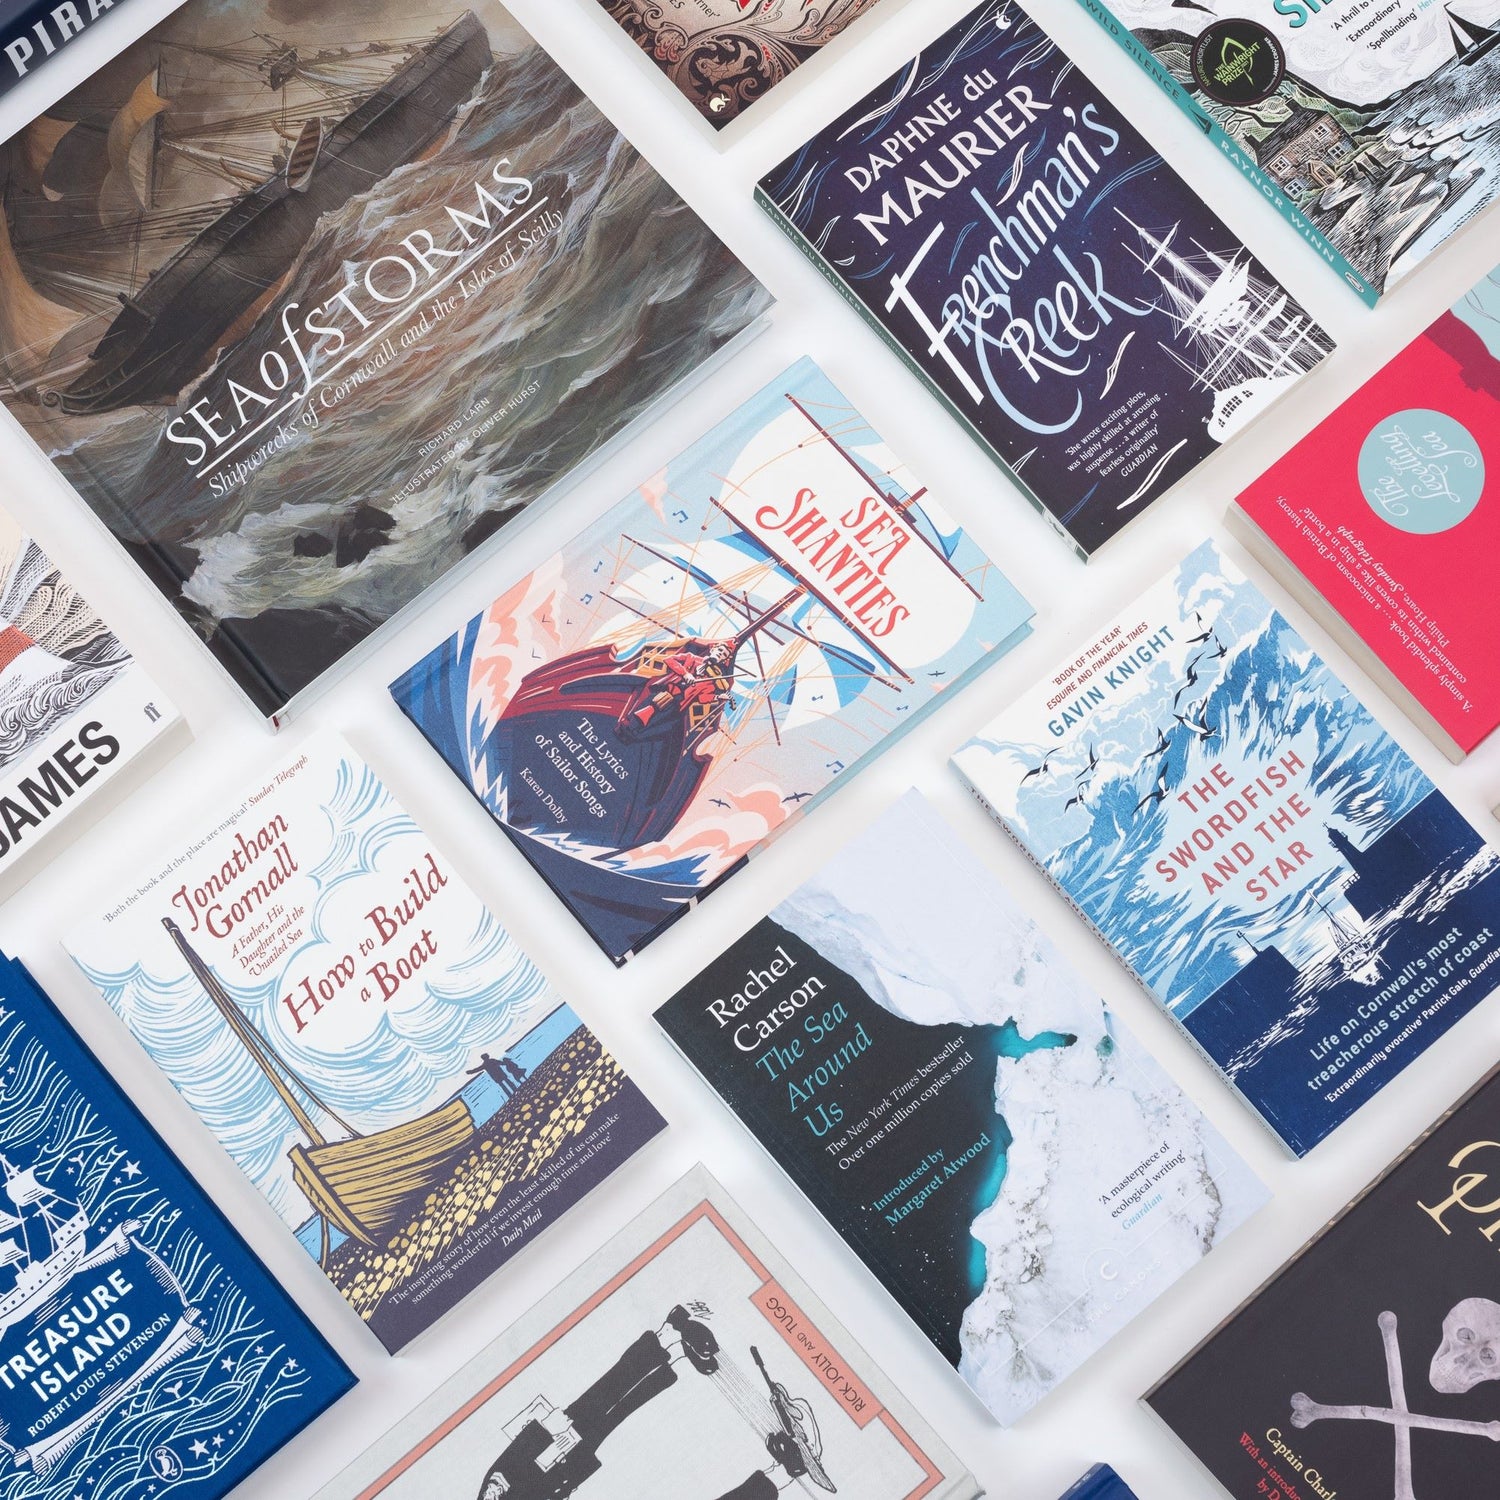 A photo of a collection of maritime-themed books pictured on a white table.